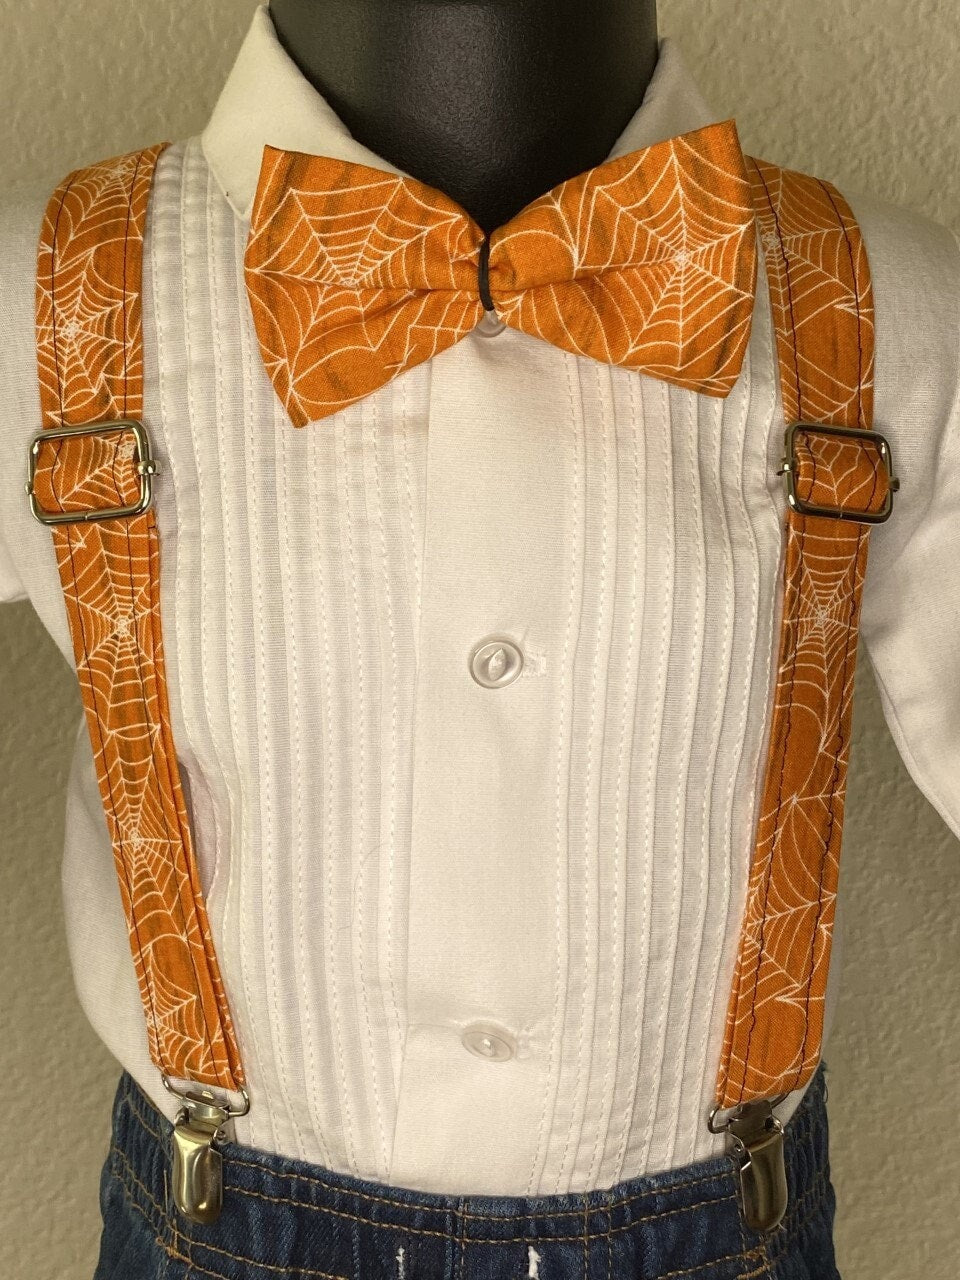 Halloween Orange Spiderweb suspenders and bow tie / Infant, Toddler, Child, Teen, Adult, Big & Tall